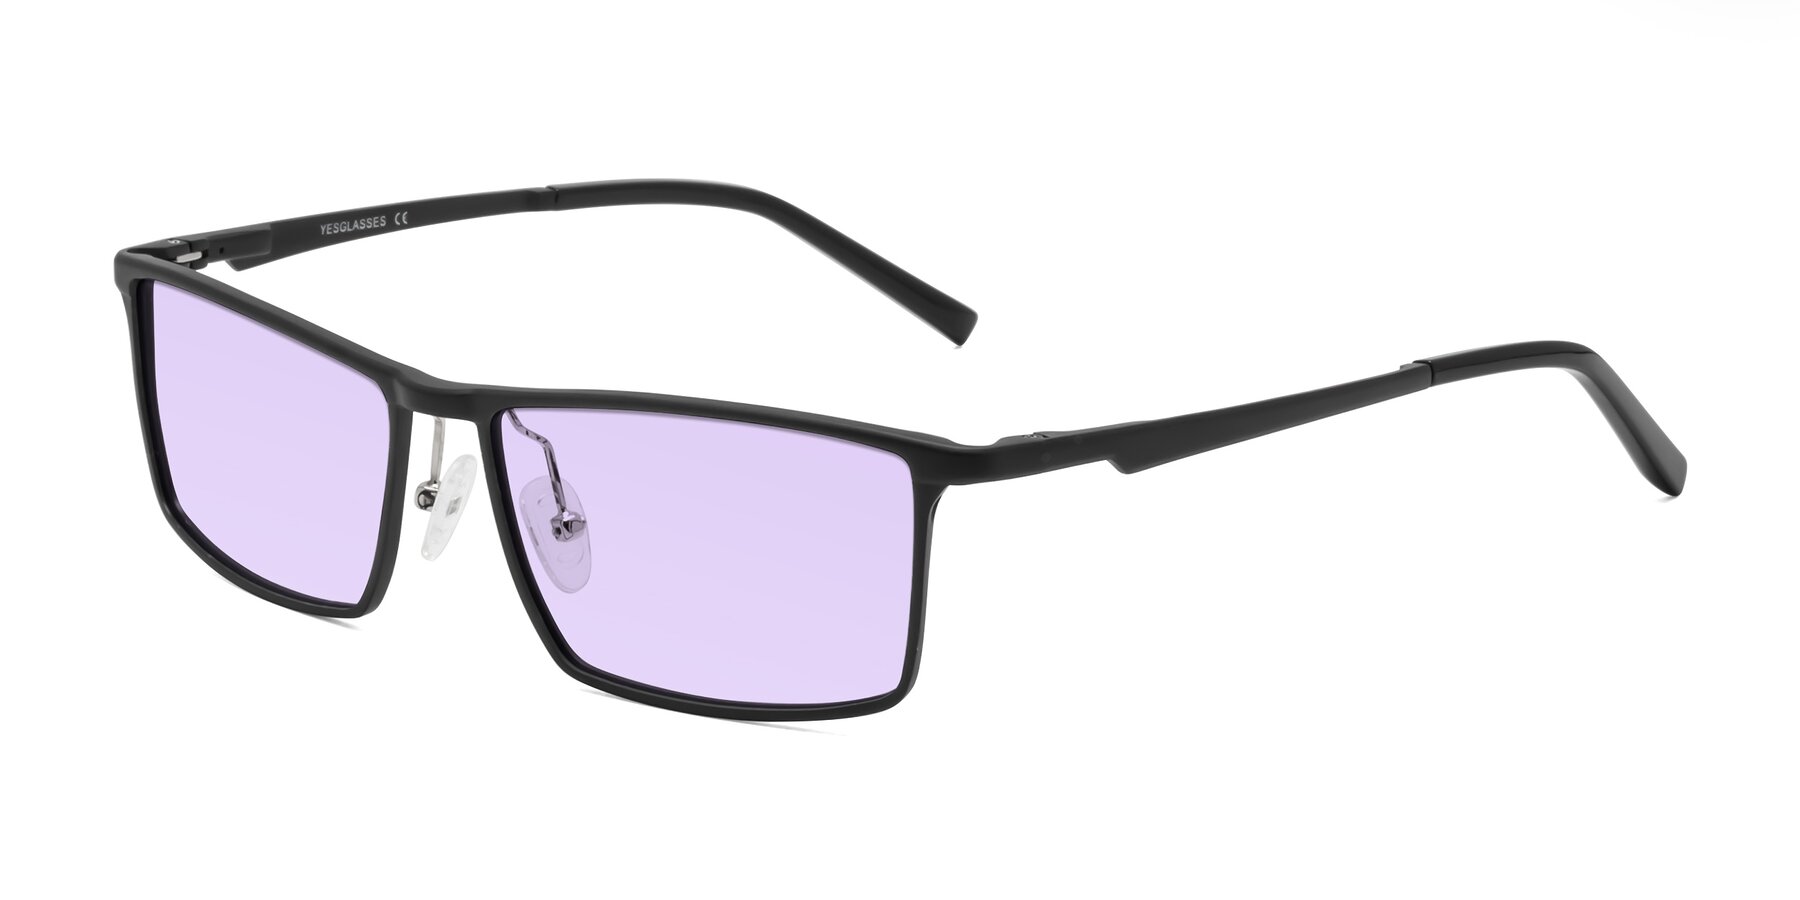 Angle of CX6330 in Black with Light Purple Tinted Lenses